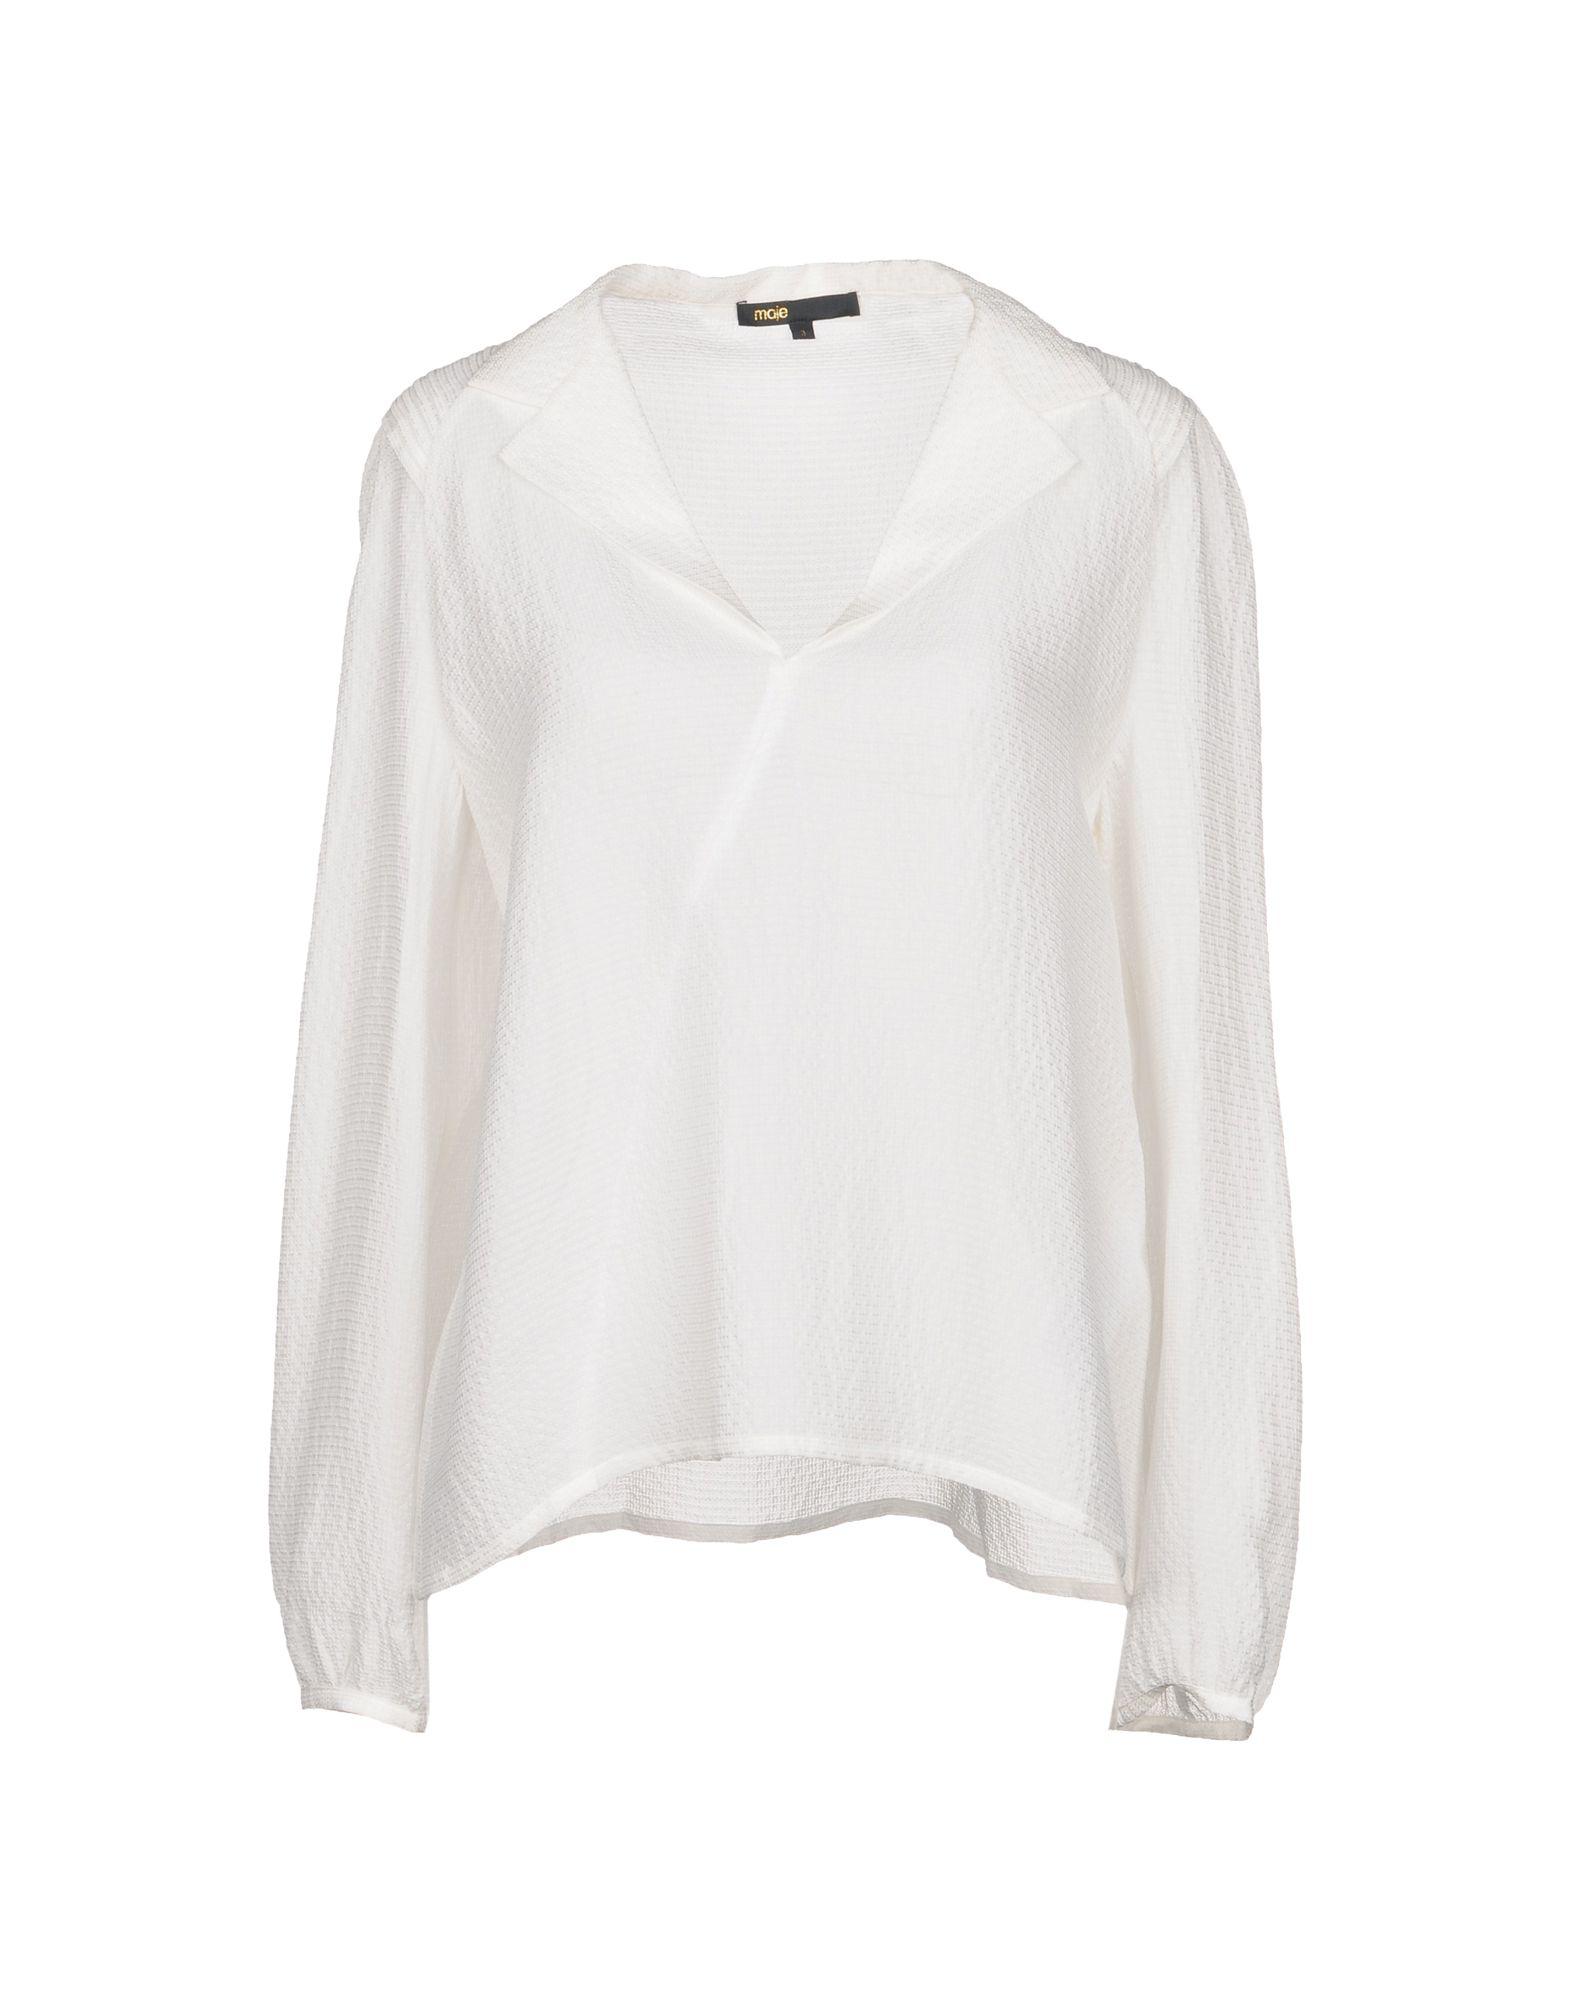 Maje Silk Blouse in Ivory (White) - Lyst